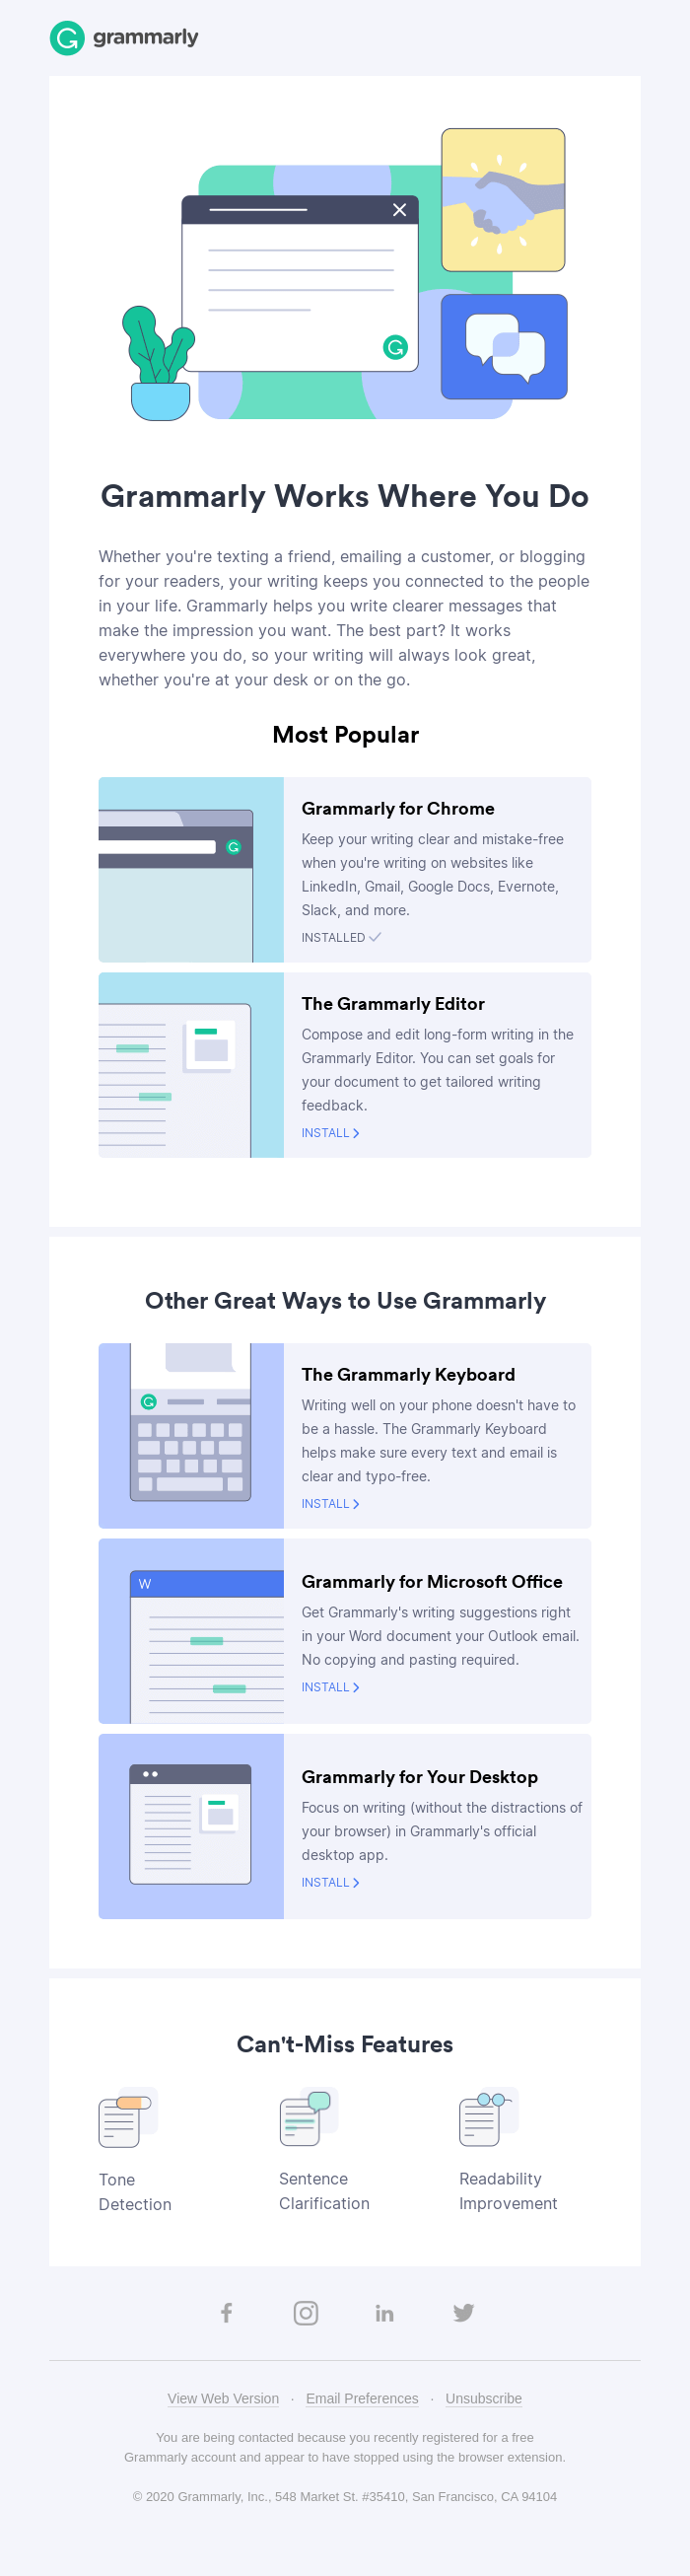 Get the most out of your Grammarly account - Grammarly Email Newsletter